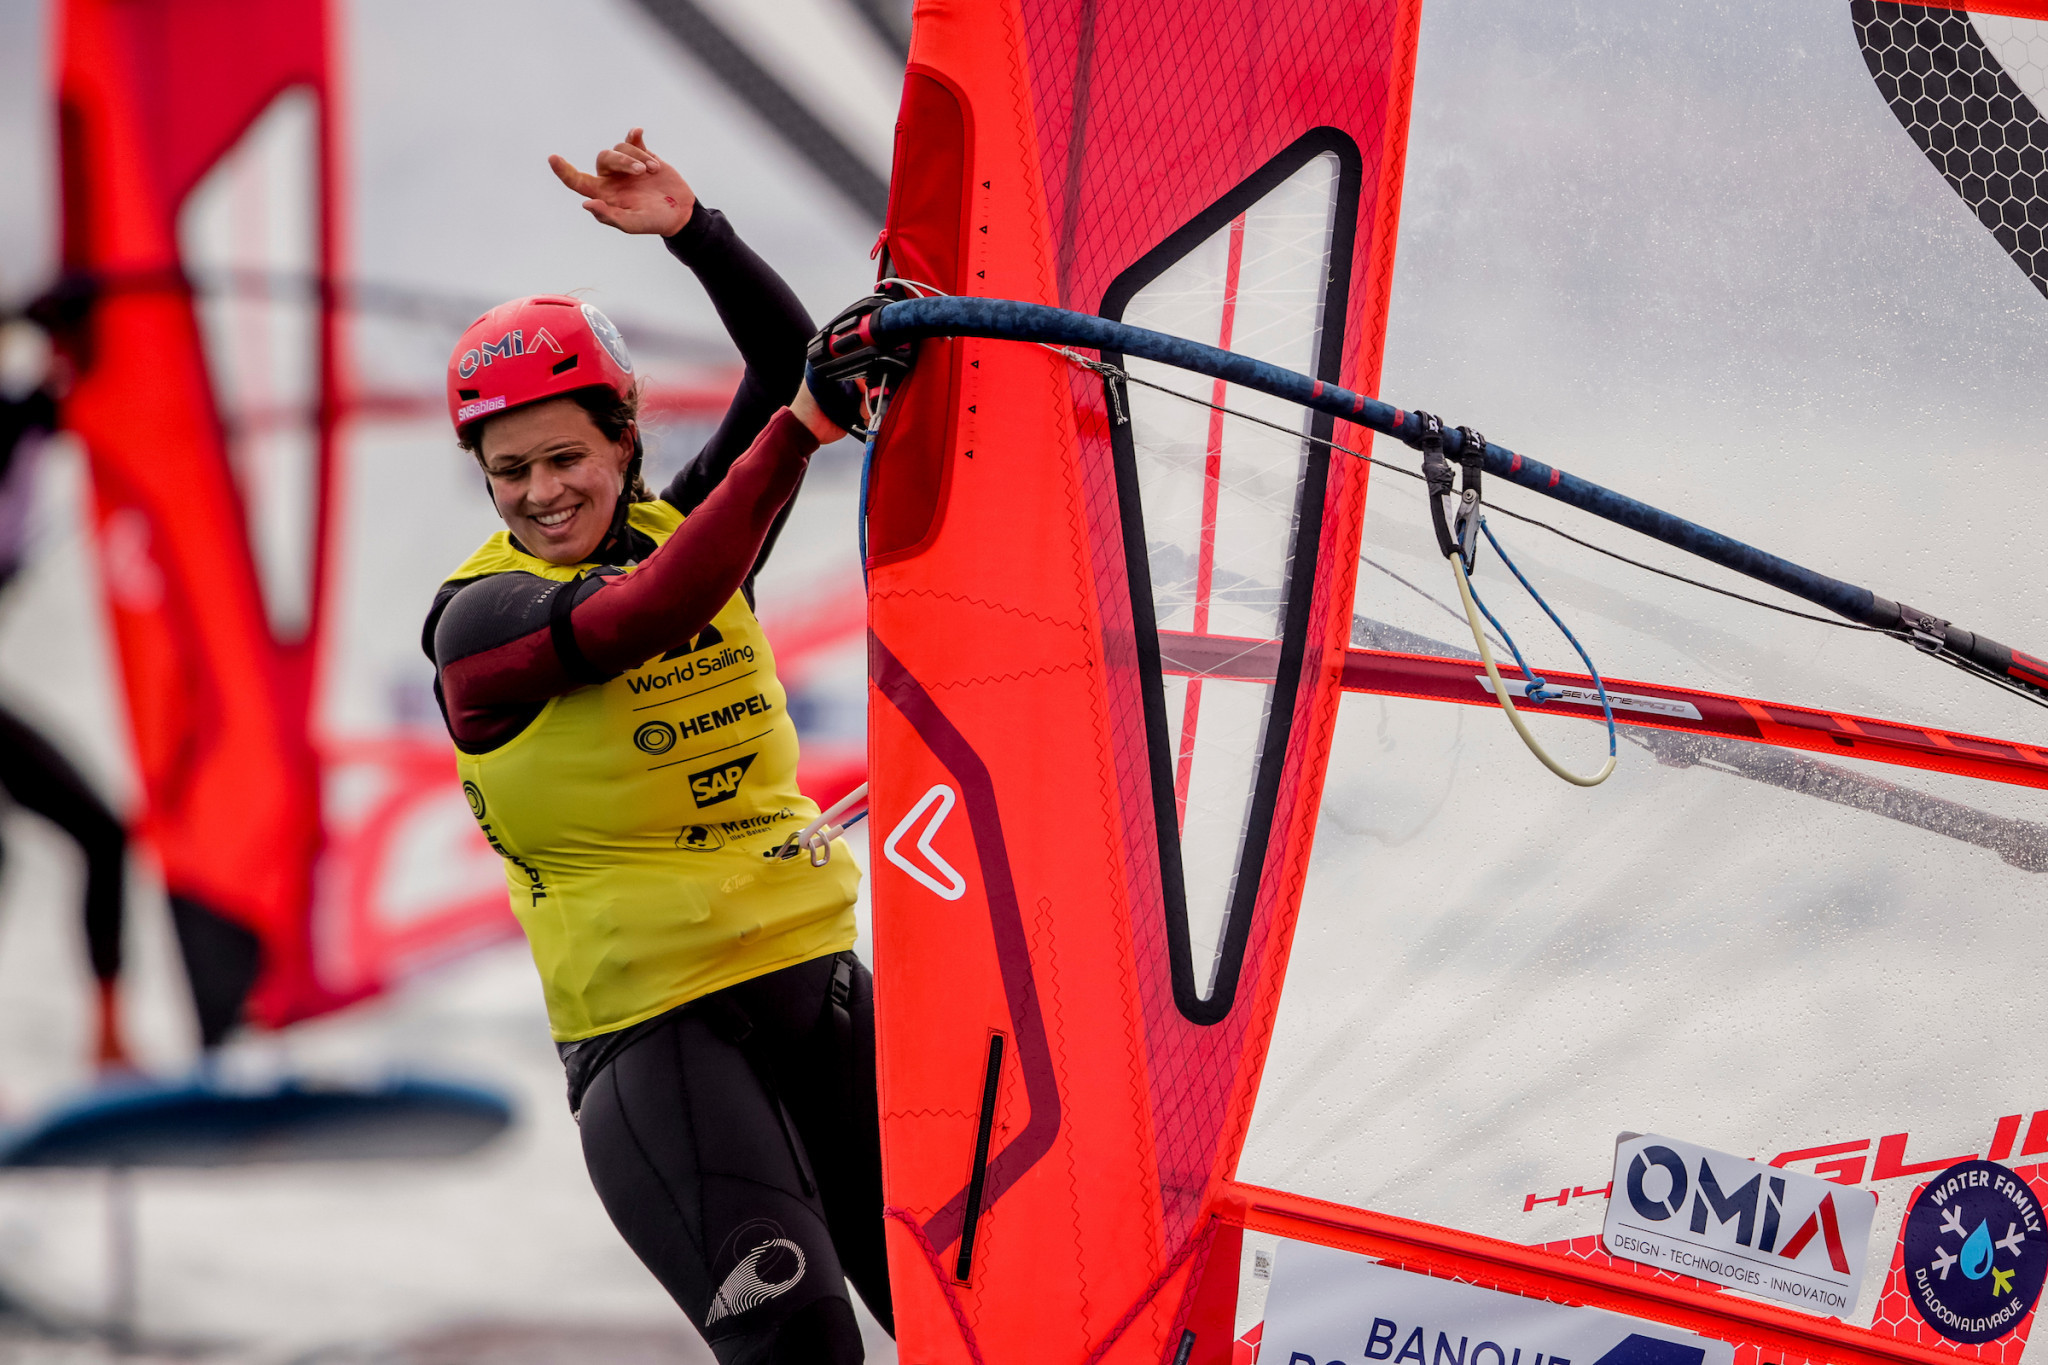 Helene Noesman remains top of the women's iQFOiL standings after the second day of racing in Mallorca ©Trofeo S.A.R. Princesa Sofía - Mallorca 2022